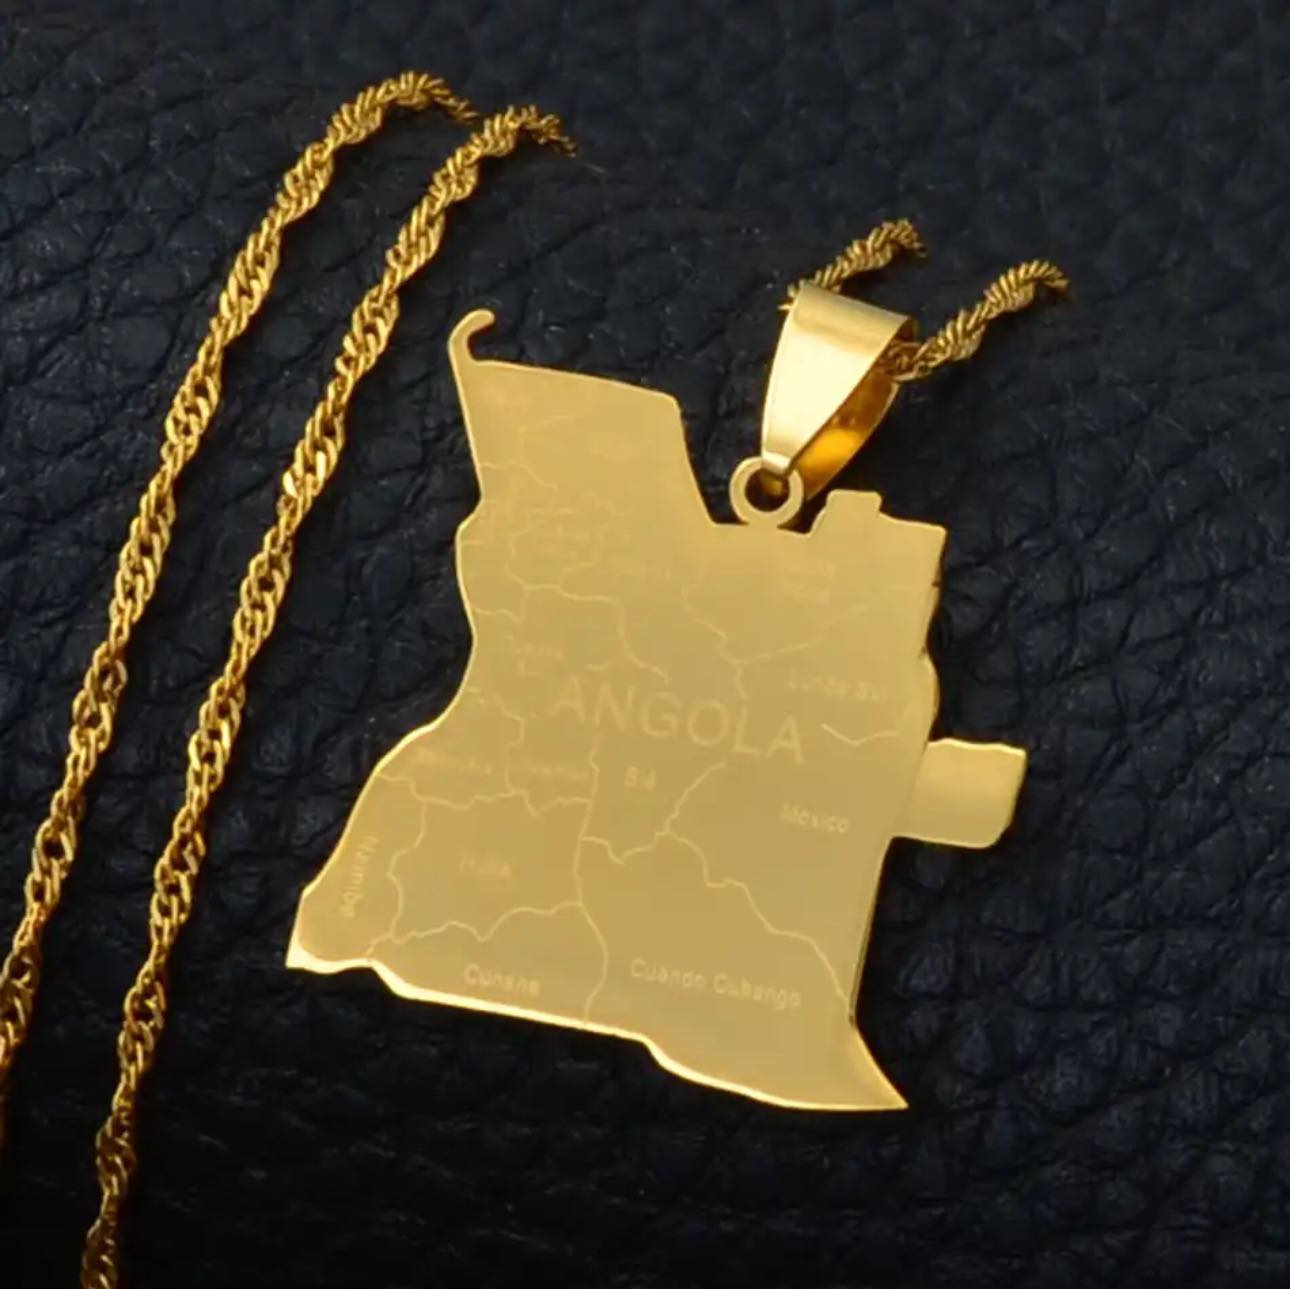 Angola Map & Cities Necklace